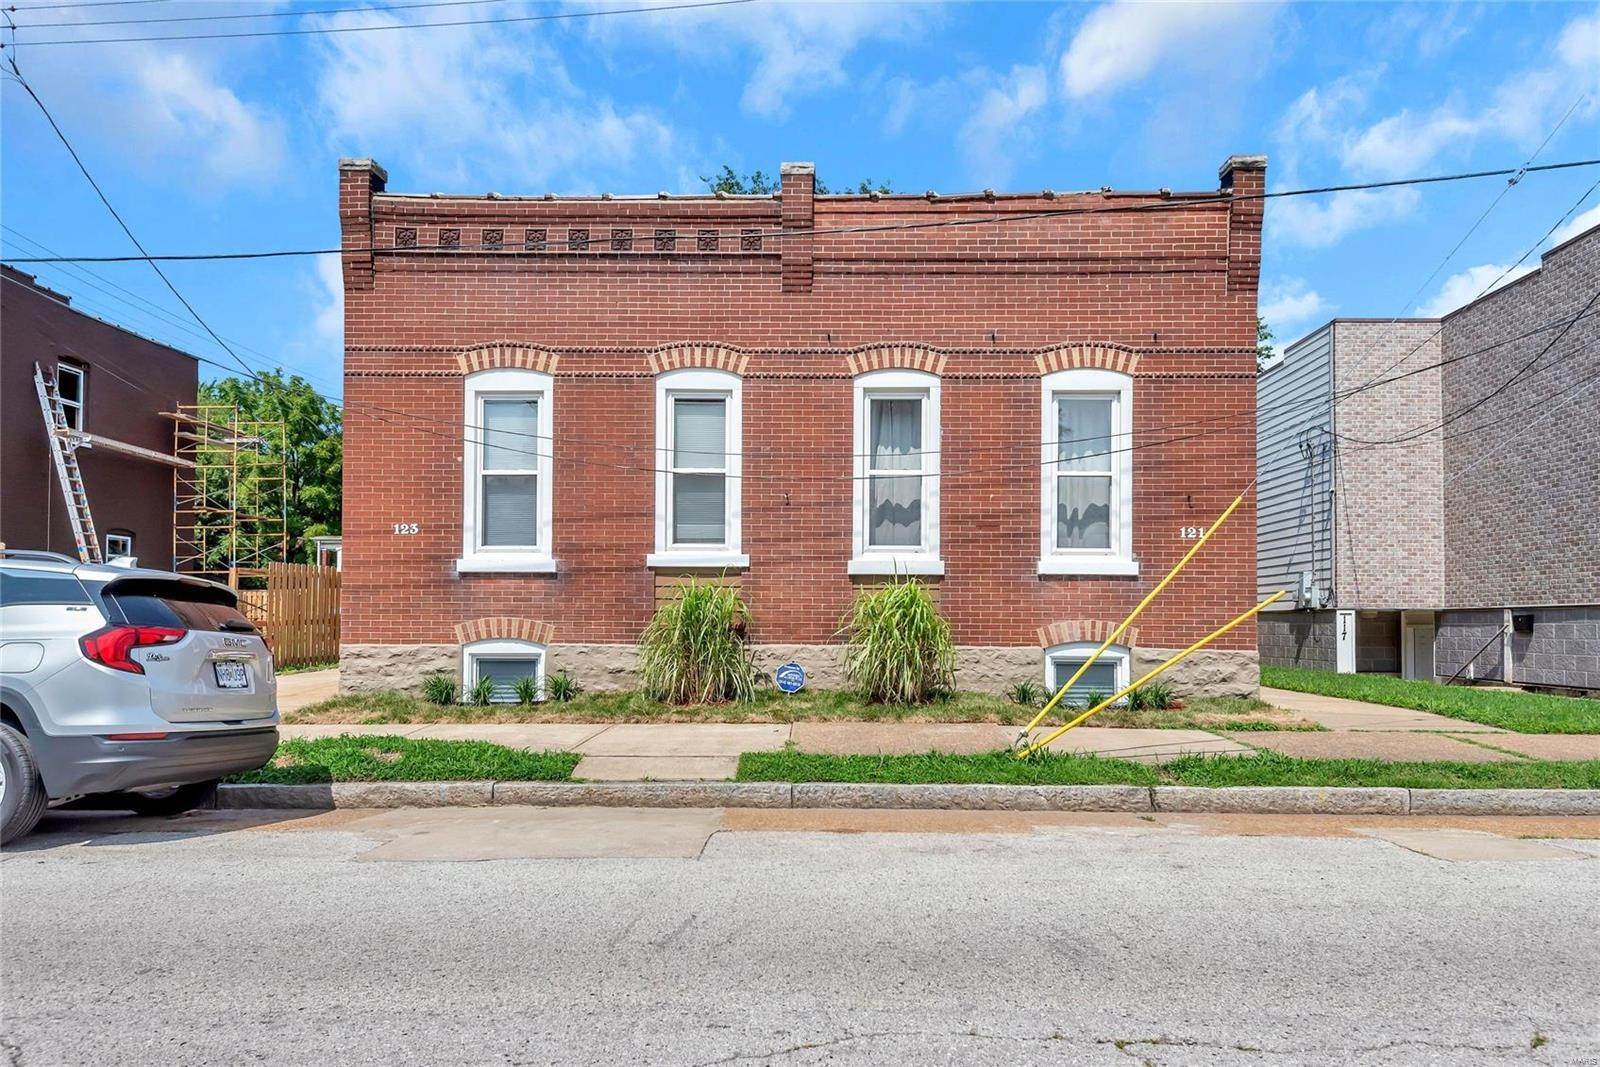 Property for Sale at 121 W Steins Street St. Louis, Missouri 63111 United States